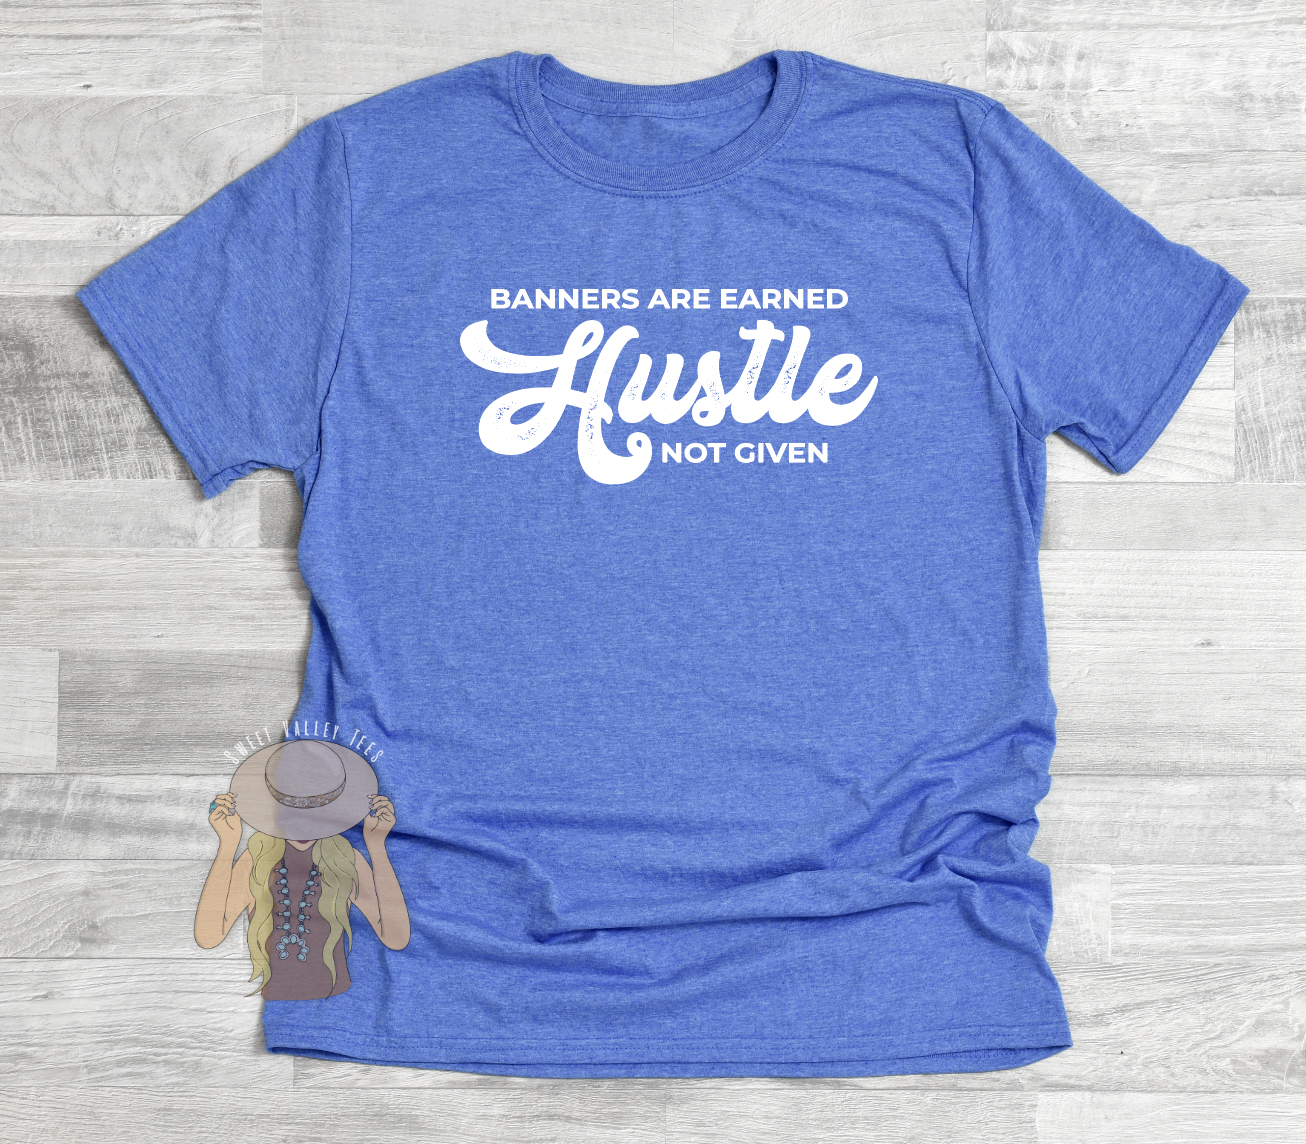 Hustle Banners are Earned not Given Tee - Heather Royal